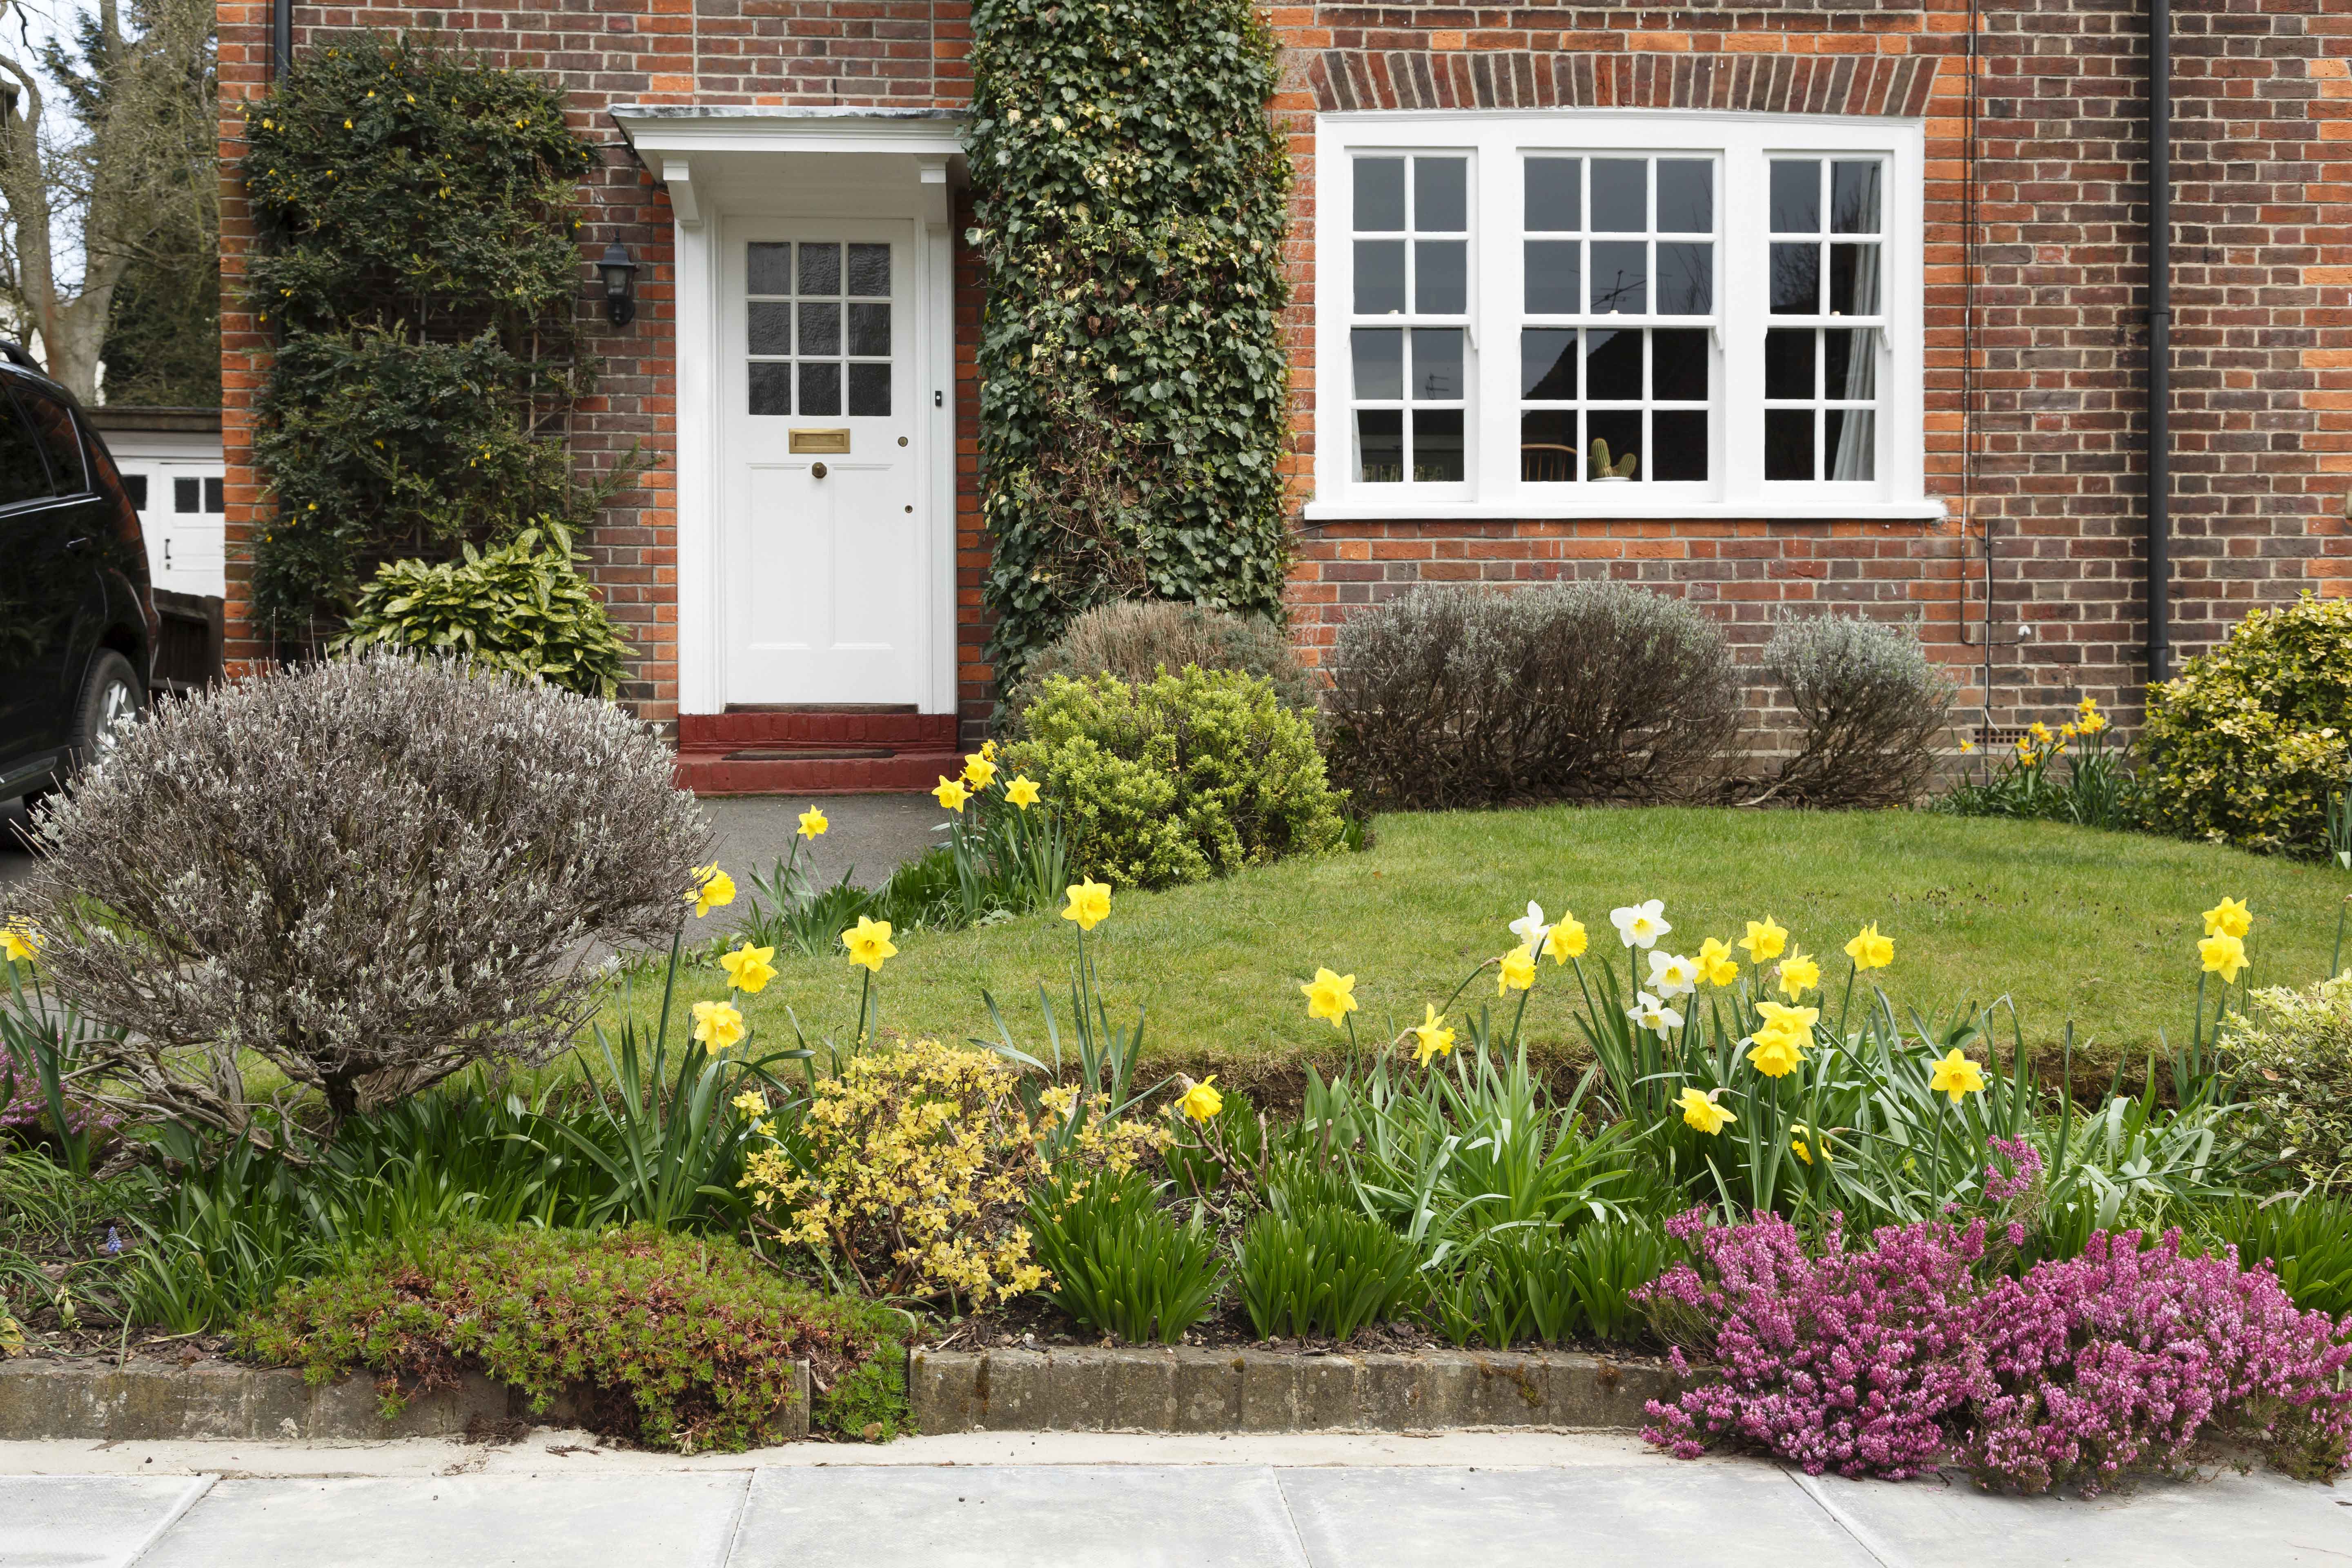 period house in cheltenham with a front garden planted with daffodil flowers